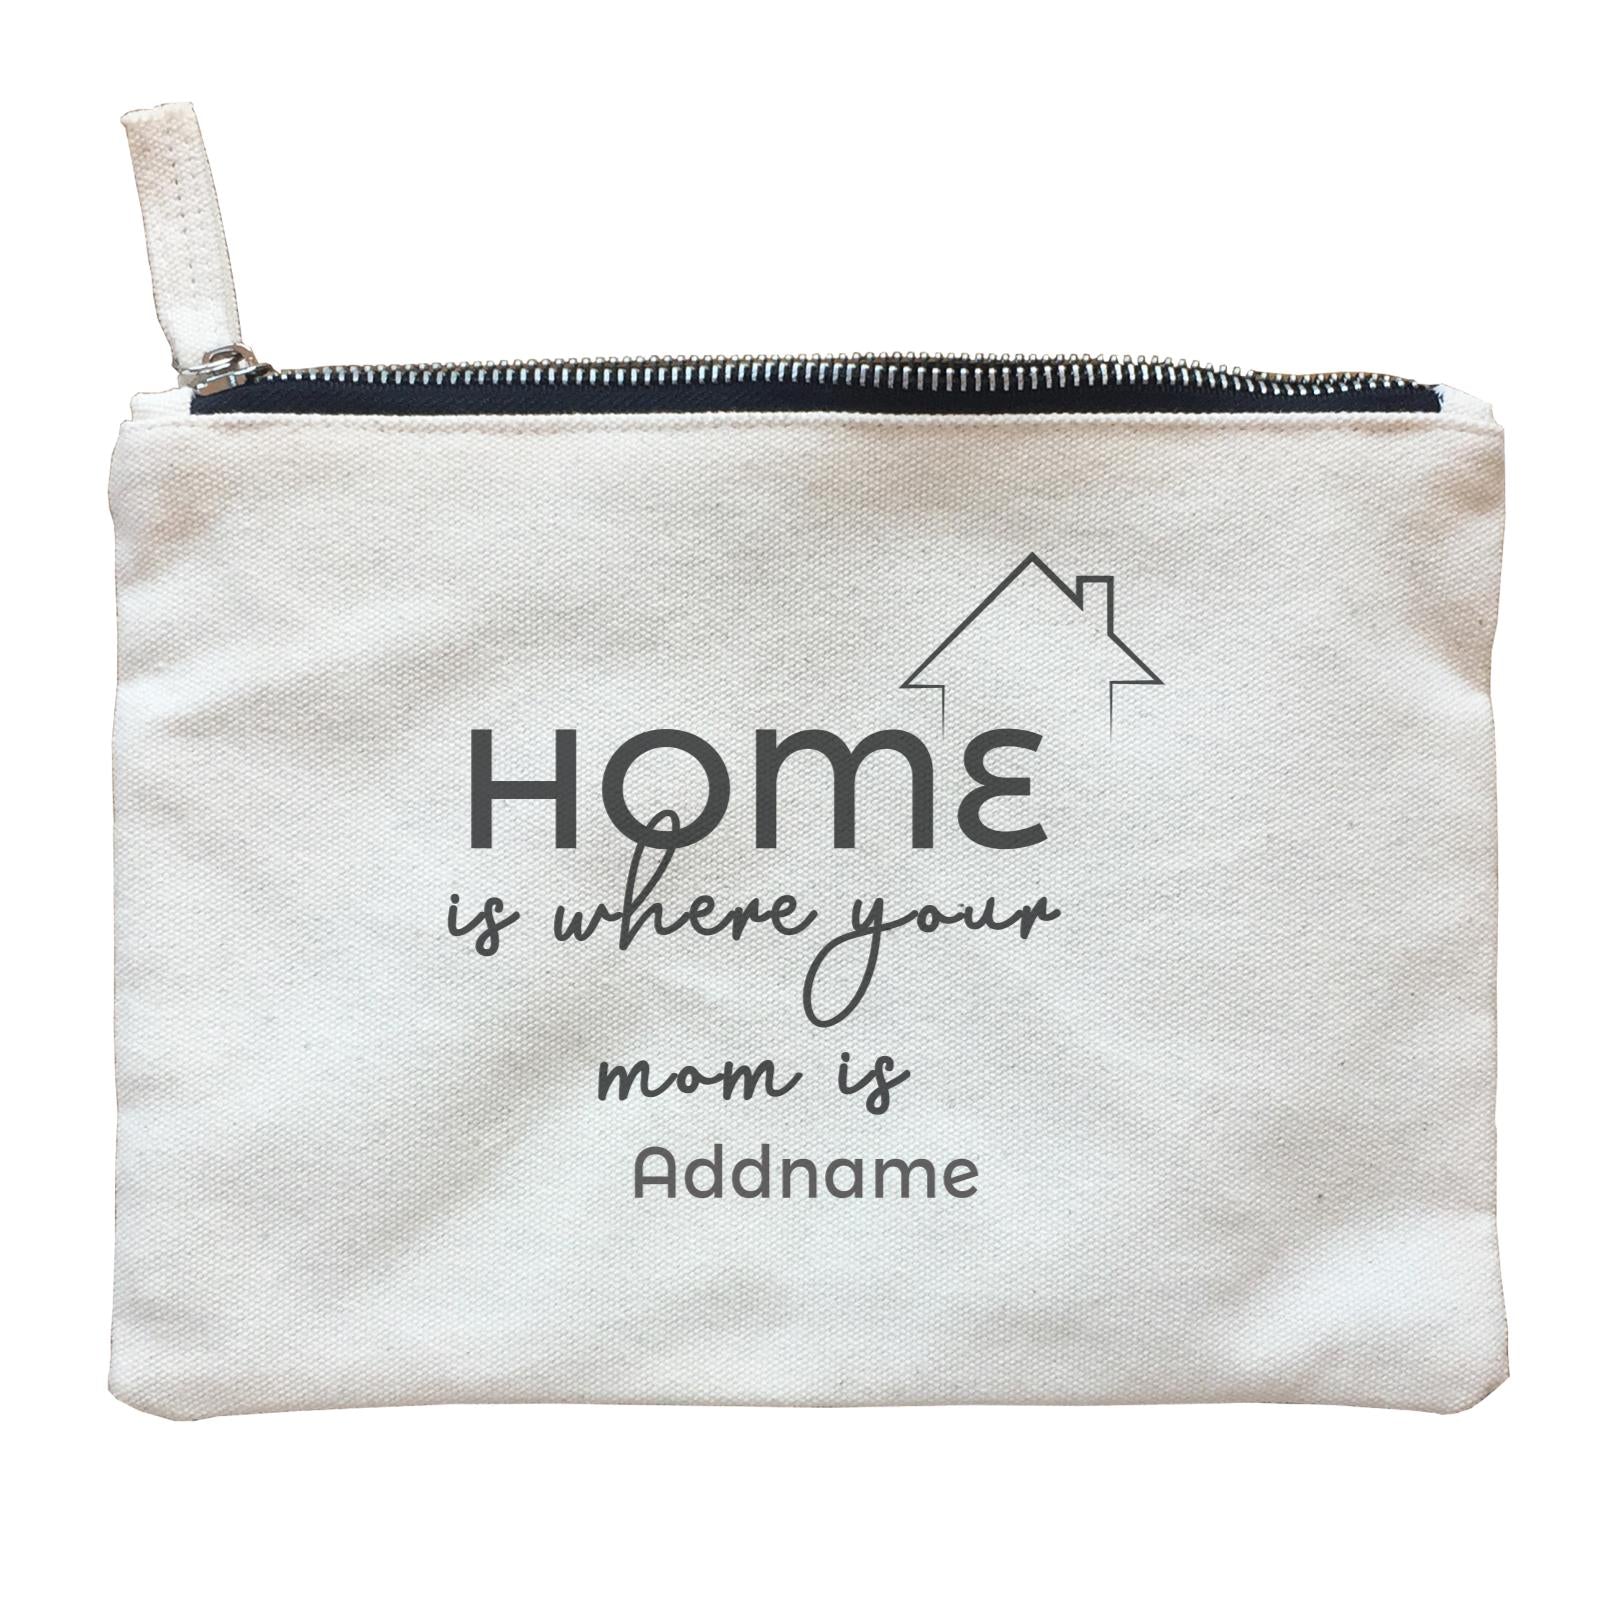 Girl Boss Quotes Home Is Where Your Mom Is Addname Zipper Pouch